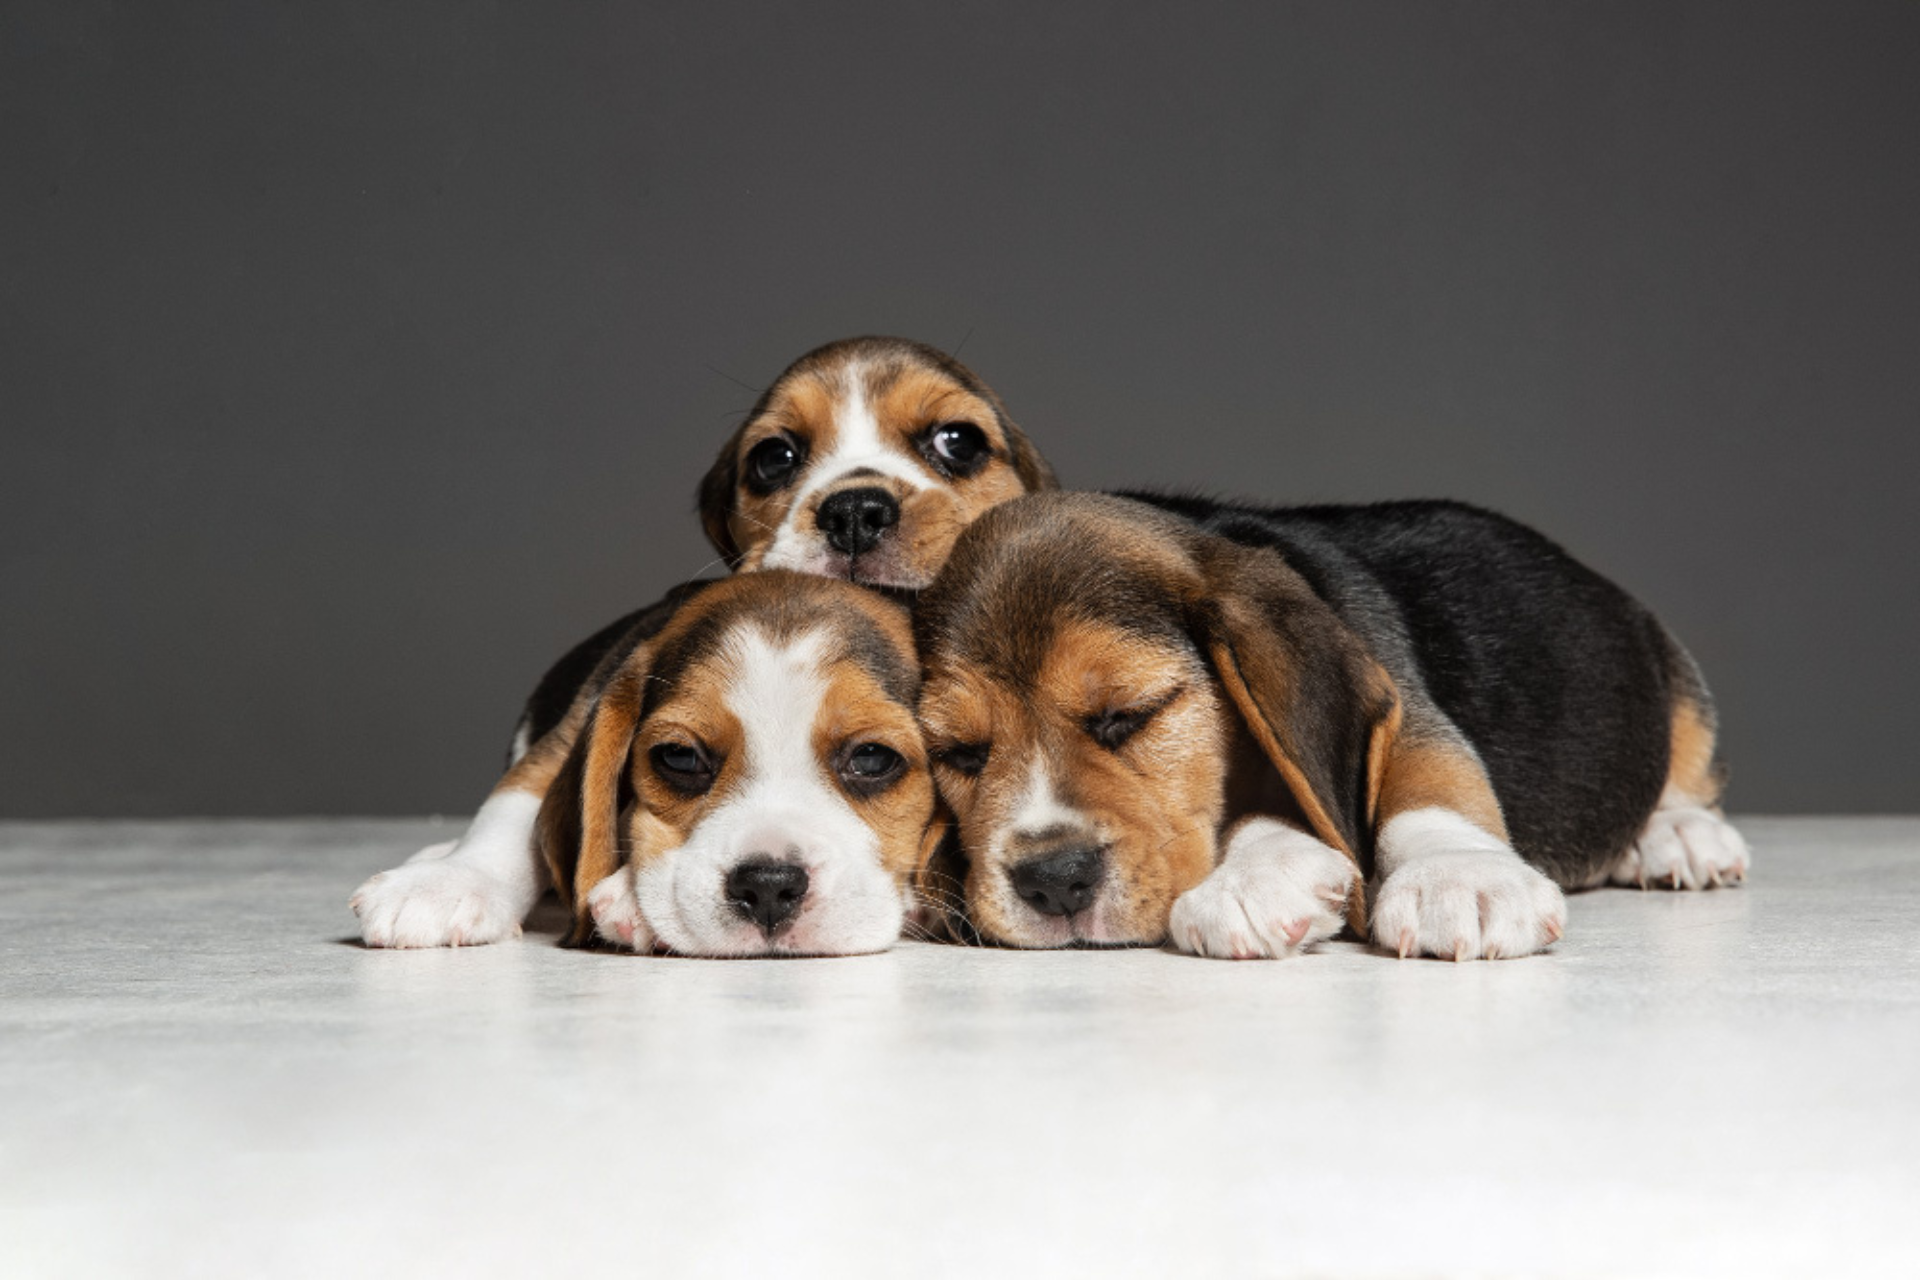 beagle-tricolor-puppies-are-posing-cute-white-braun-black-doggies-pets-playing-grey-wall-look-attented-playful-concept-motion-movement-action-negative-space-dog